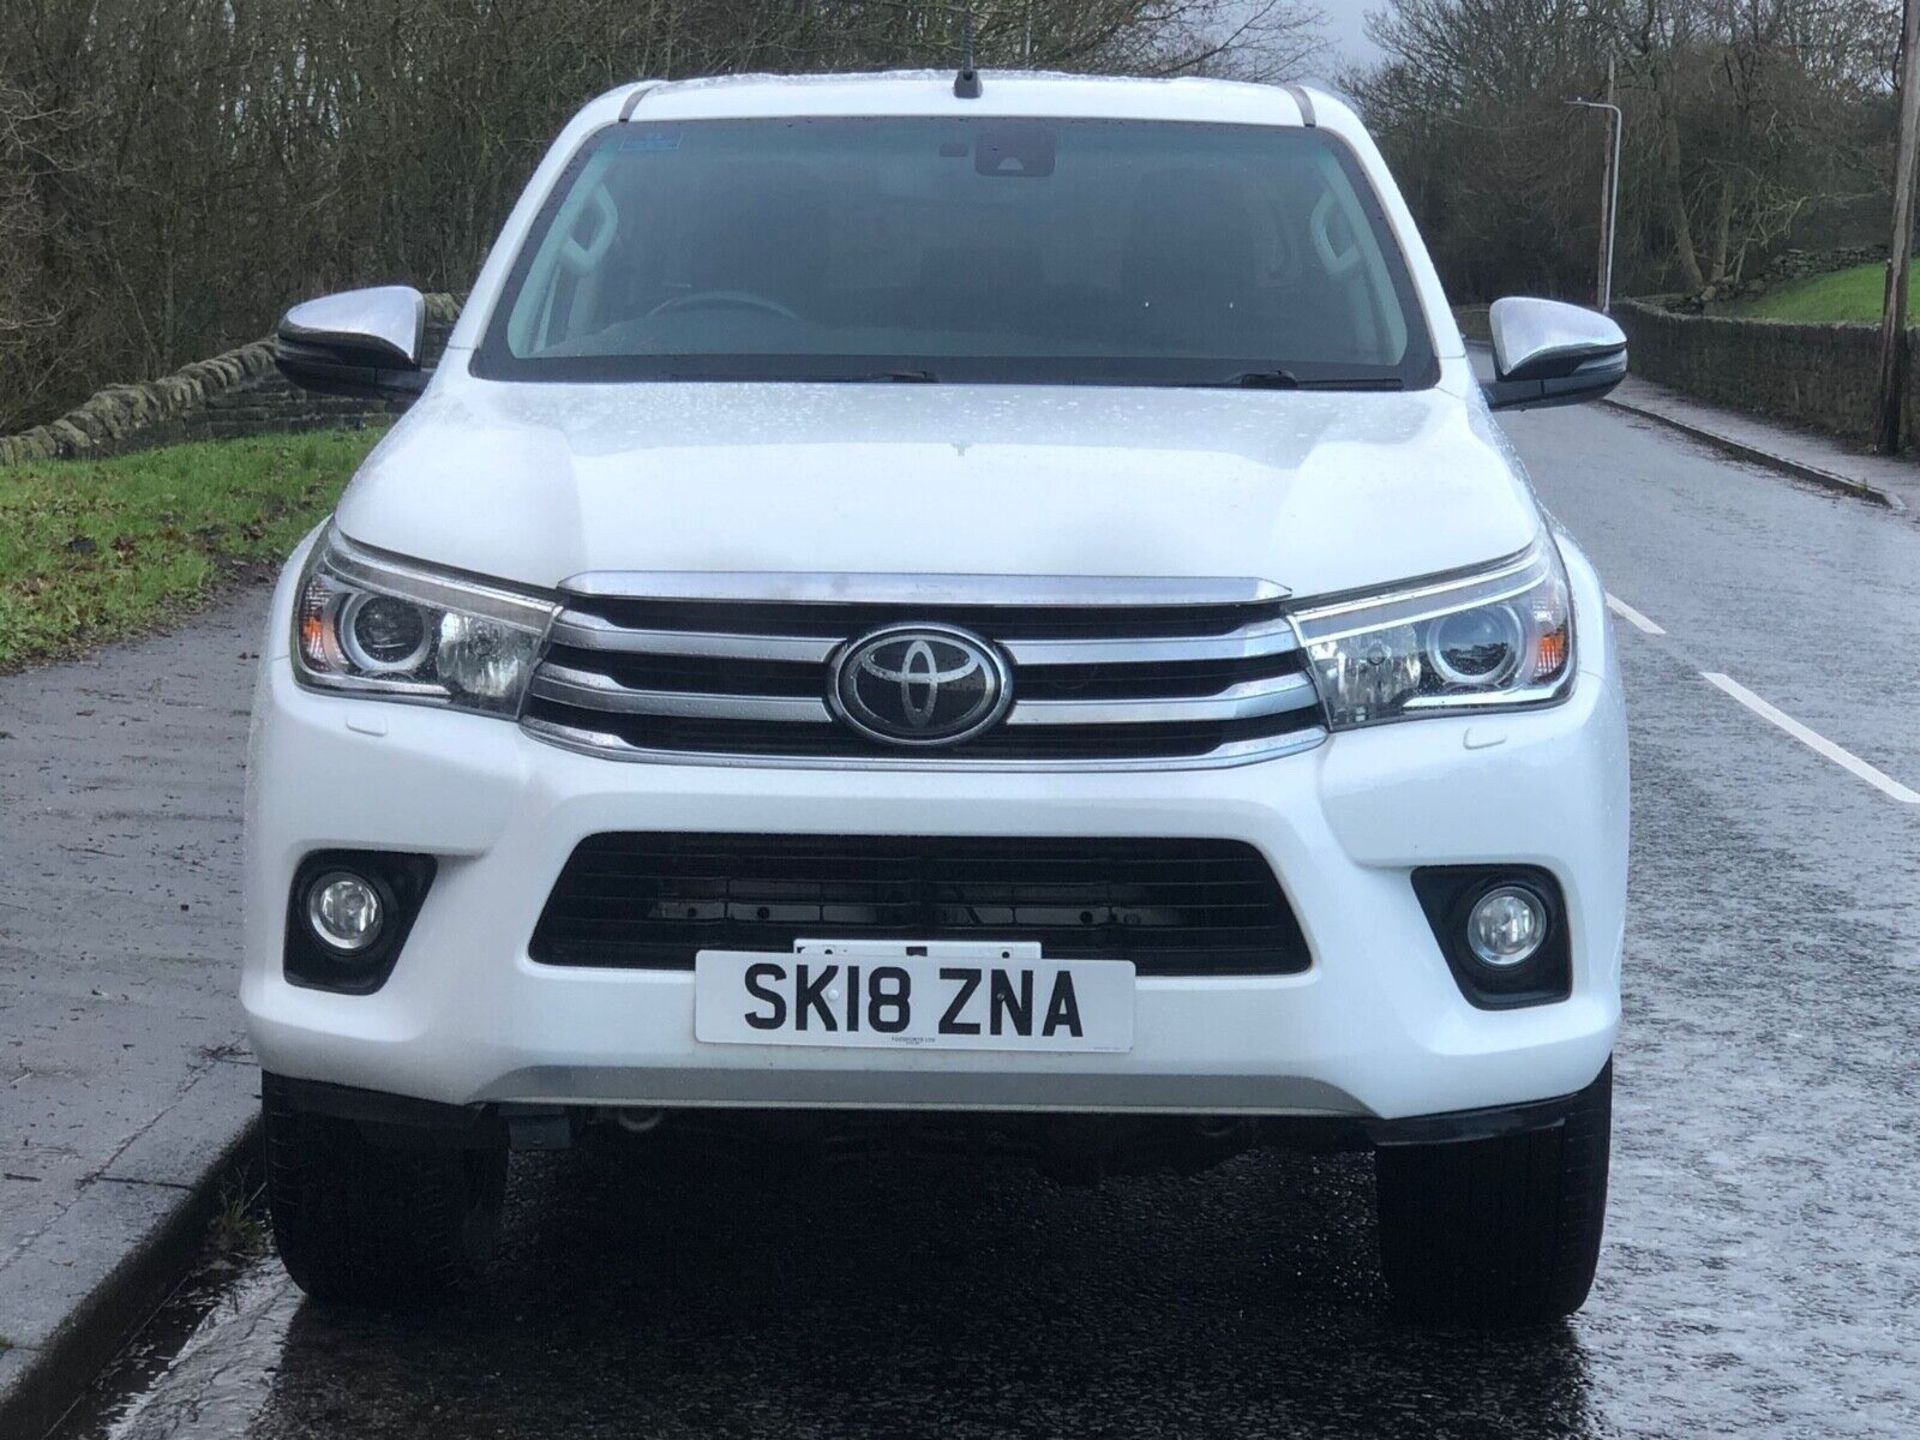 2018/18 TOYOTA HILUX 2.4 INVINCIBLE DOUBLE CAB - OFF-ROAD ADVENTURE READY>>--NO VAT ON HAMMER--<< - Image 3 of 14